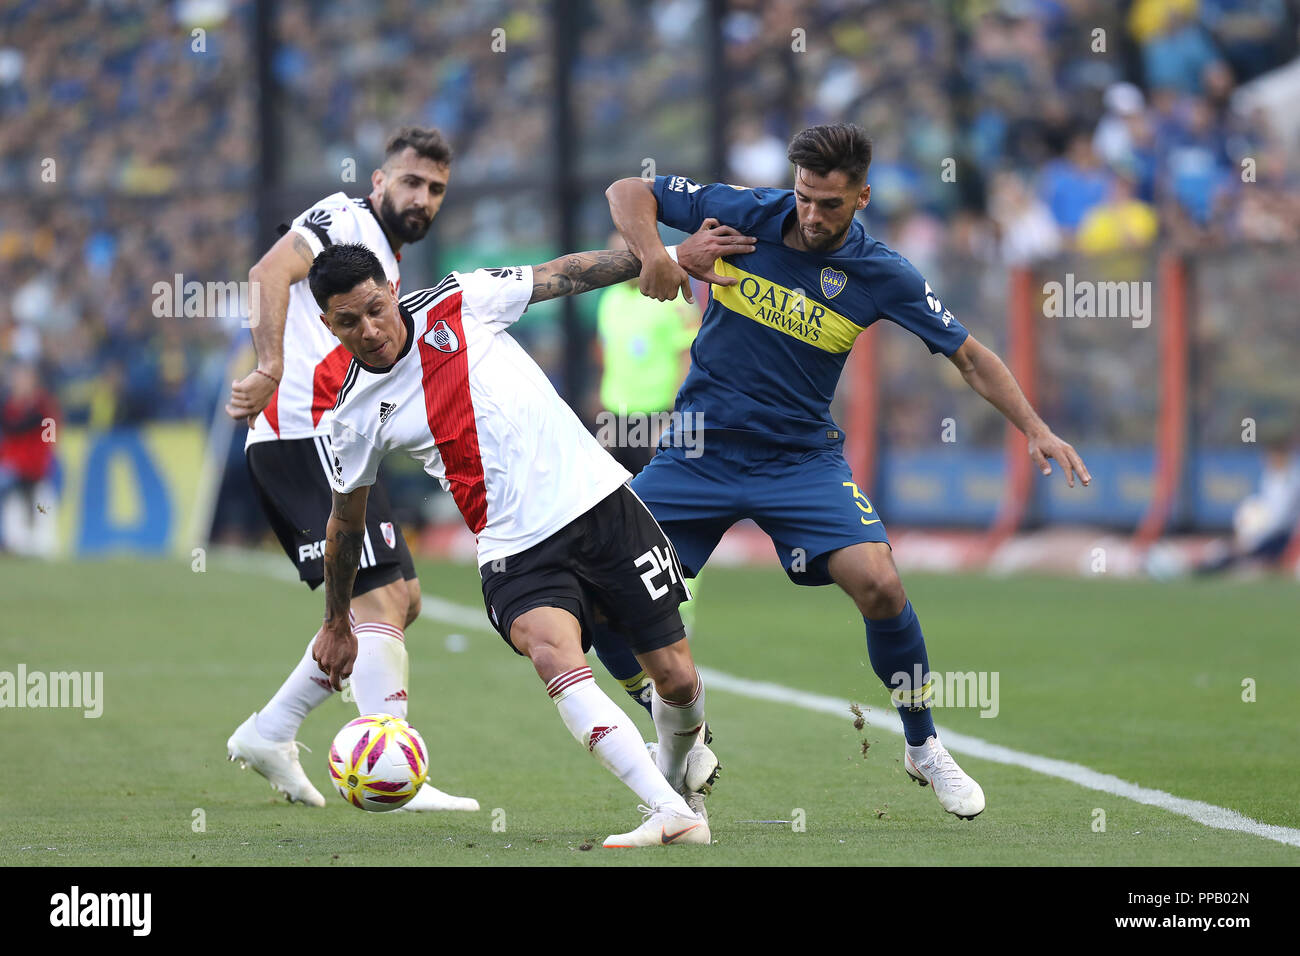 BUENOS AIRES, ARGENTINA - SEPTEMBER 23, 2008: Enzo Perez (River) fighting the ball with Emanuel Mas (Boca) in the Alberto J. Armanado in Buenos Aires, Stock Photo